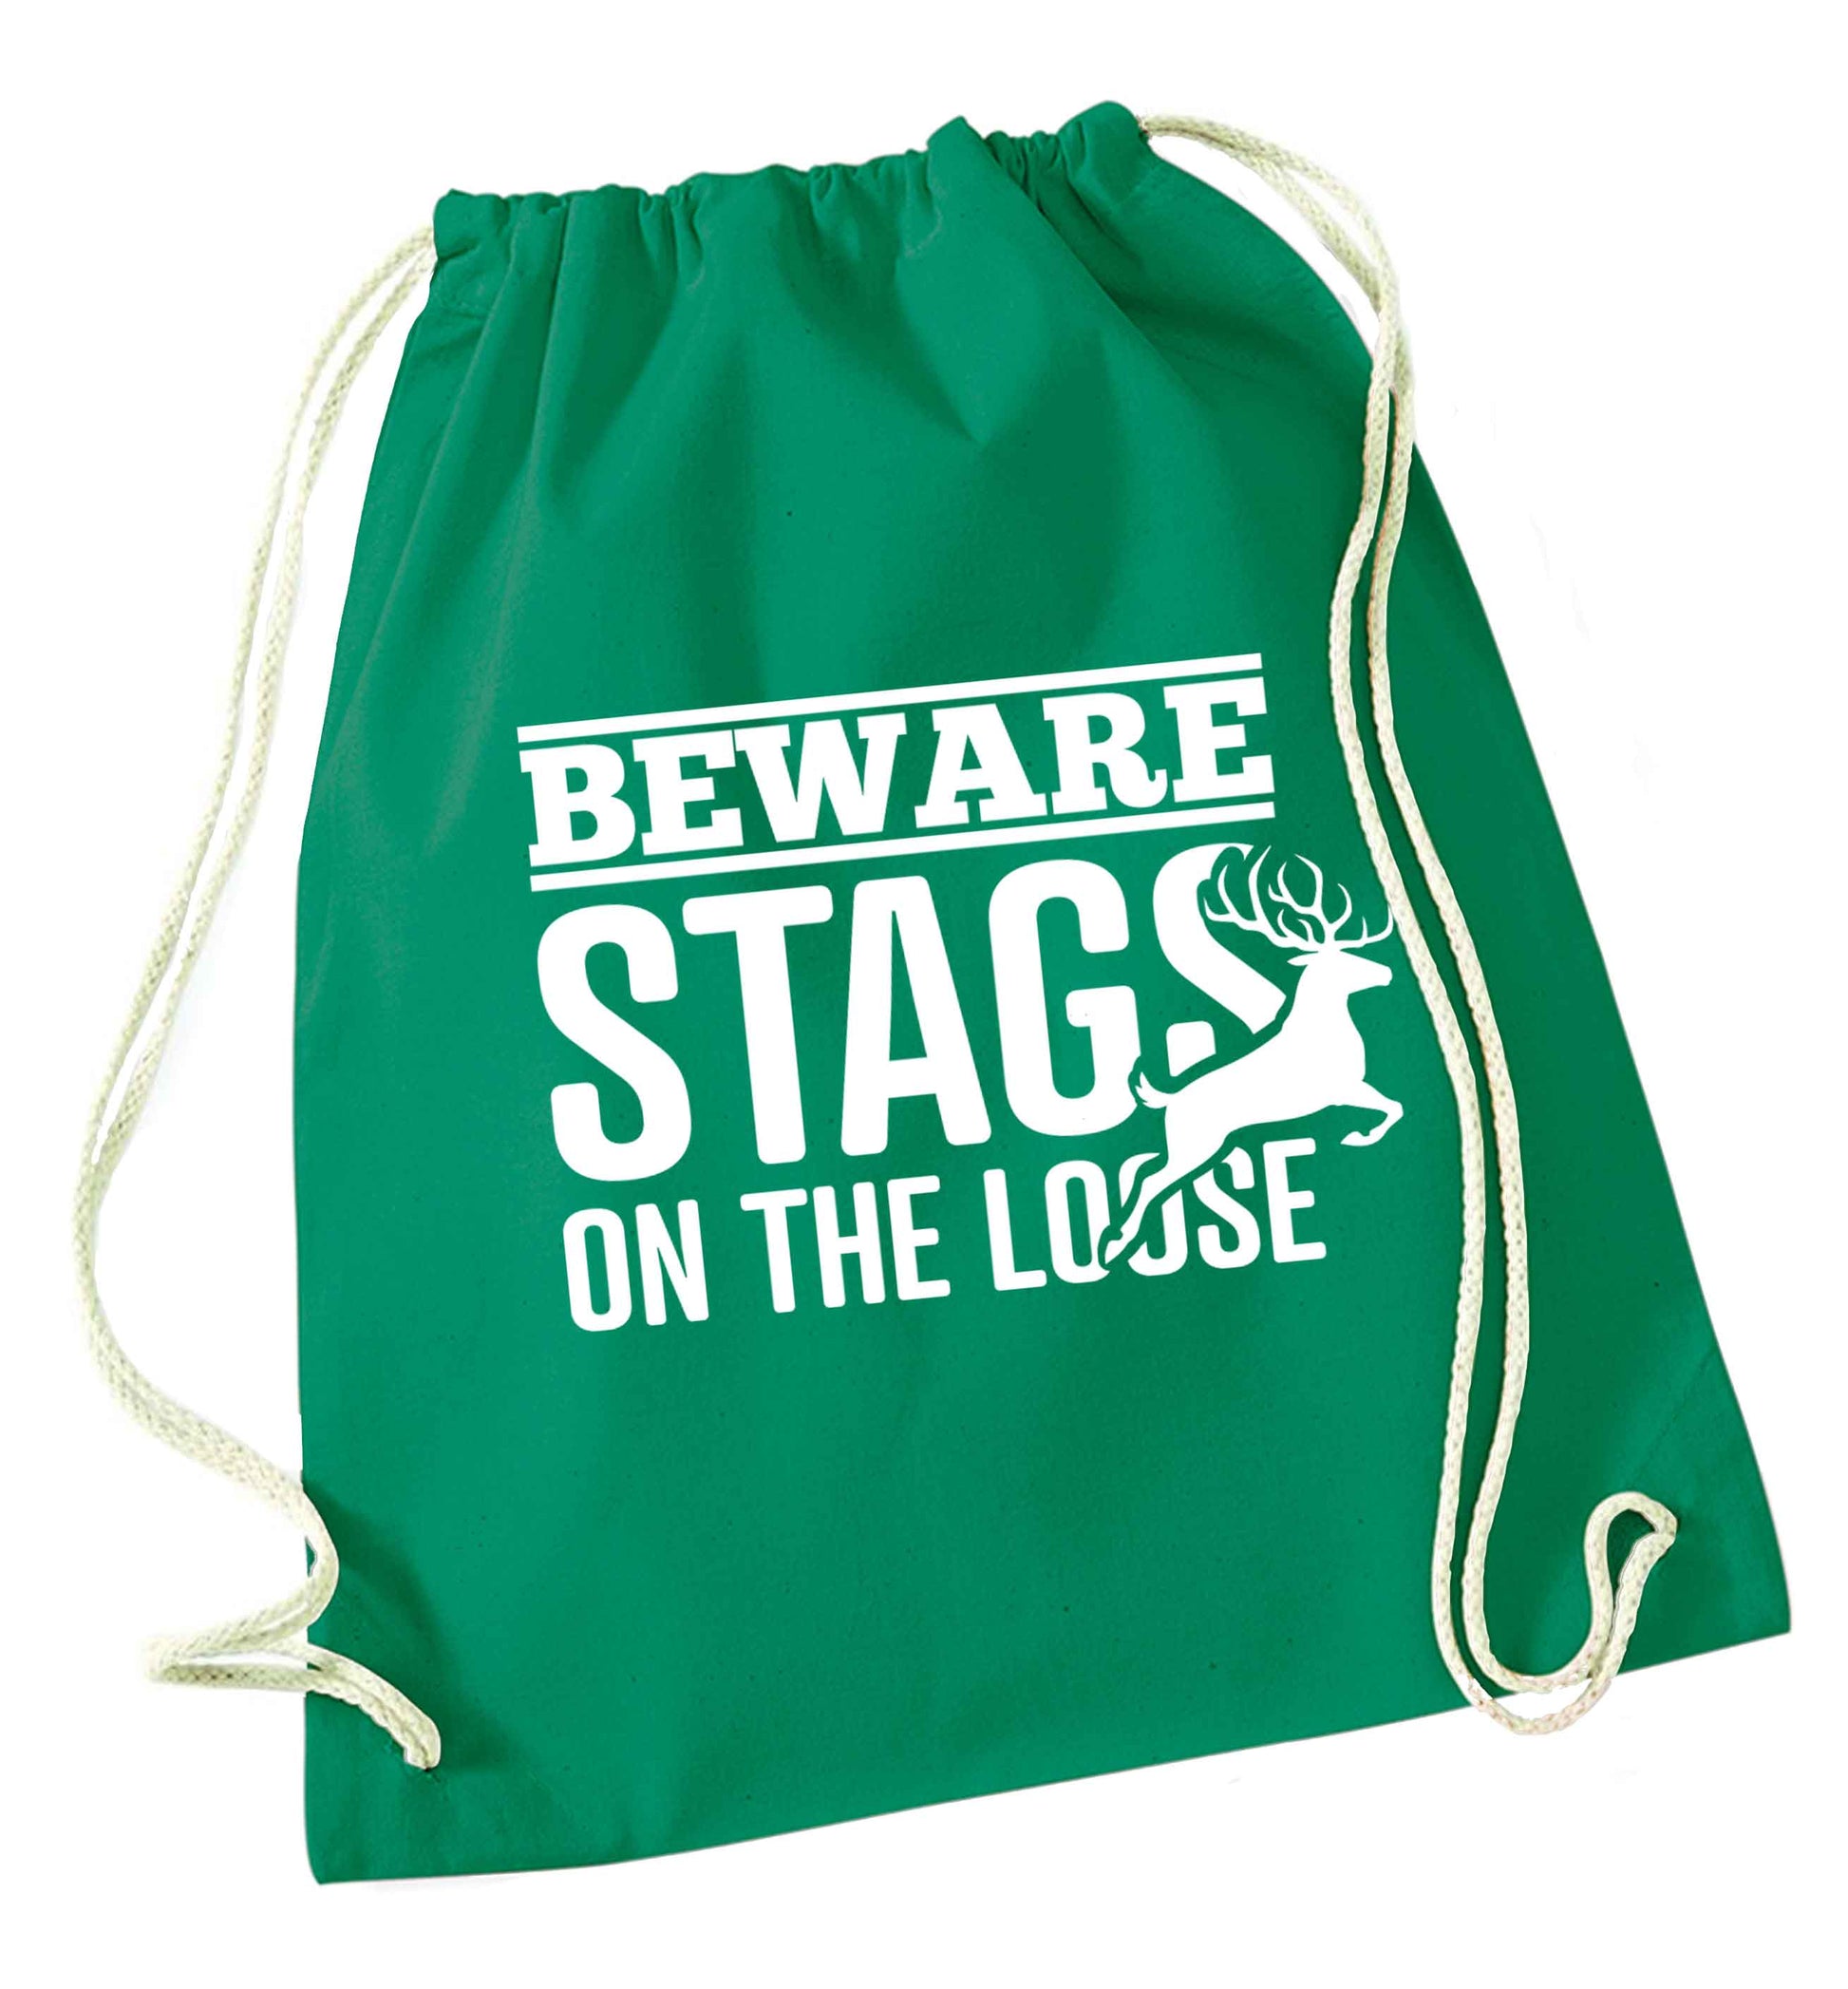 Beware stags on the loose green drawstring bag